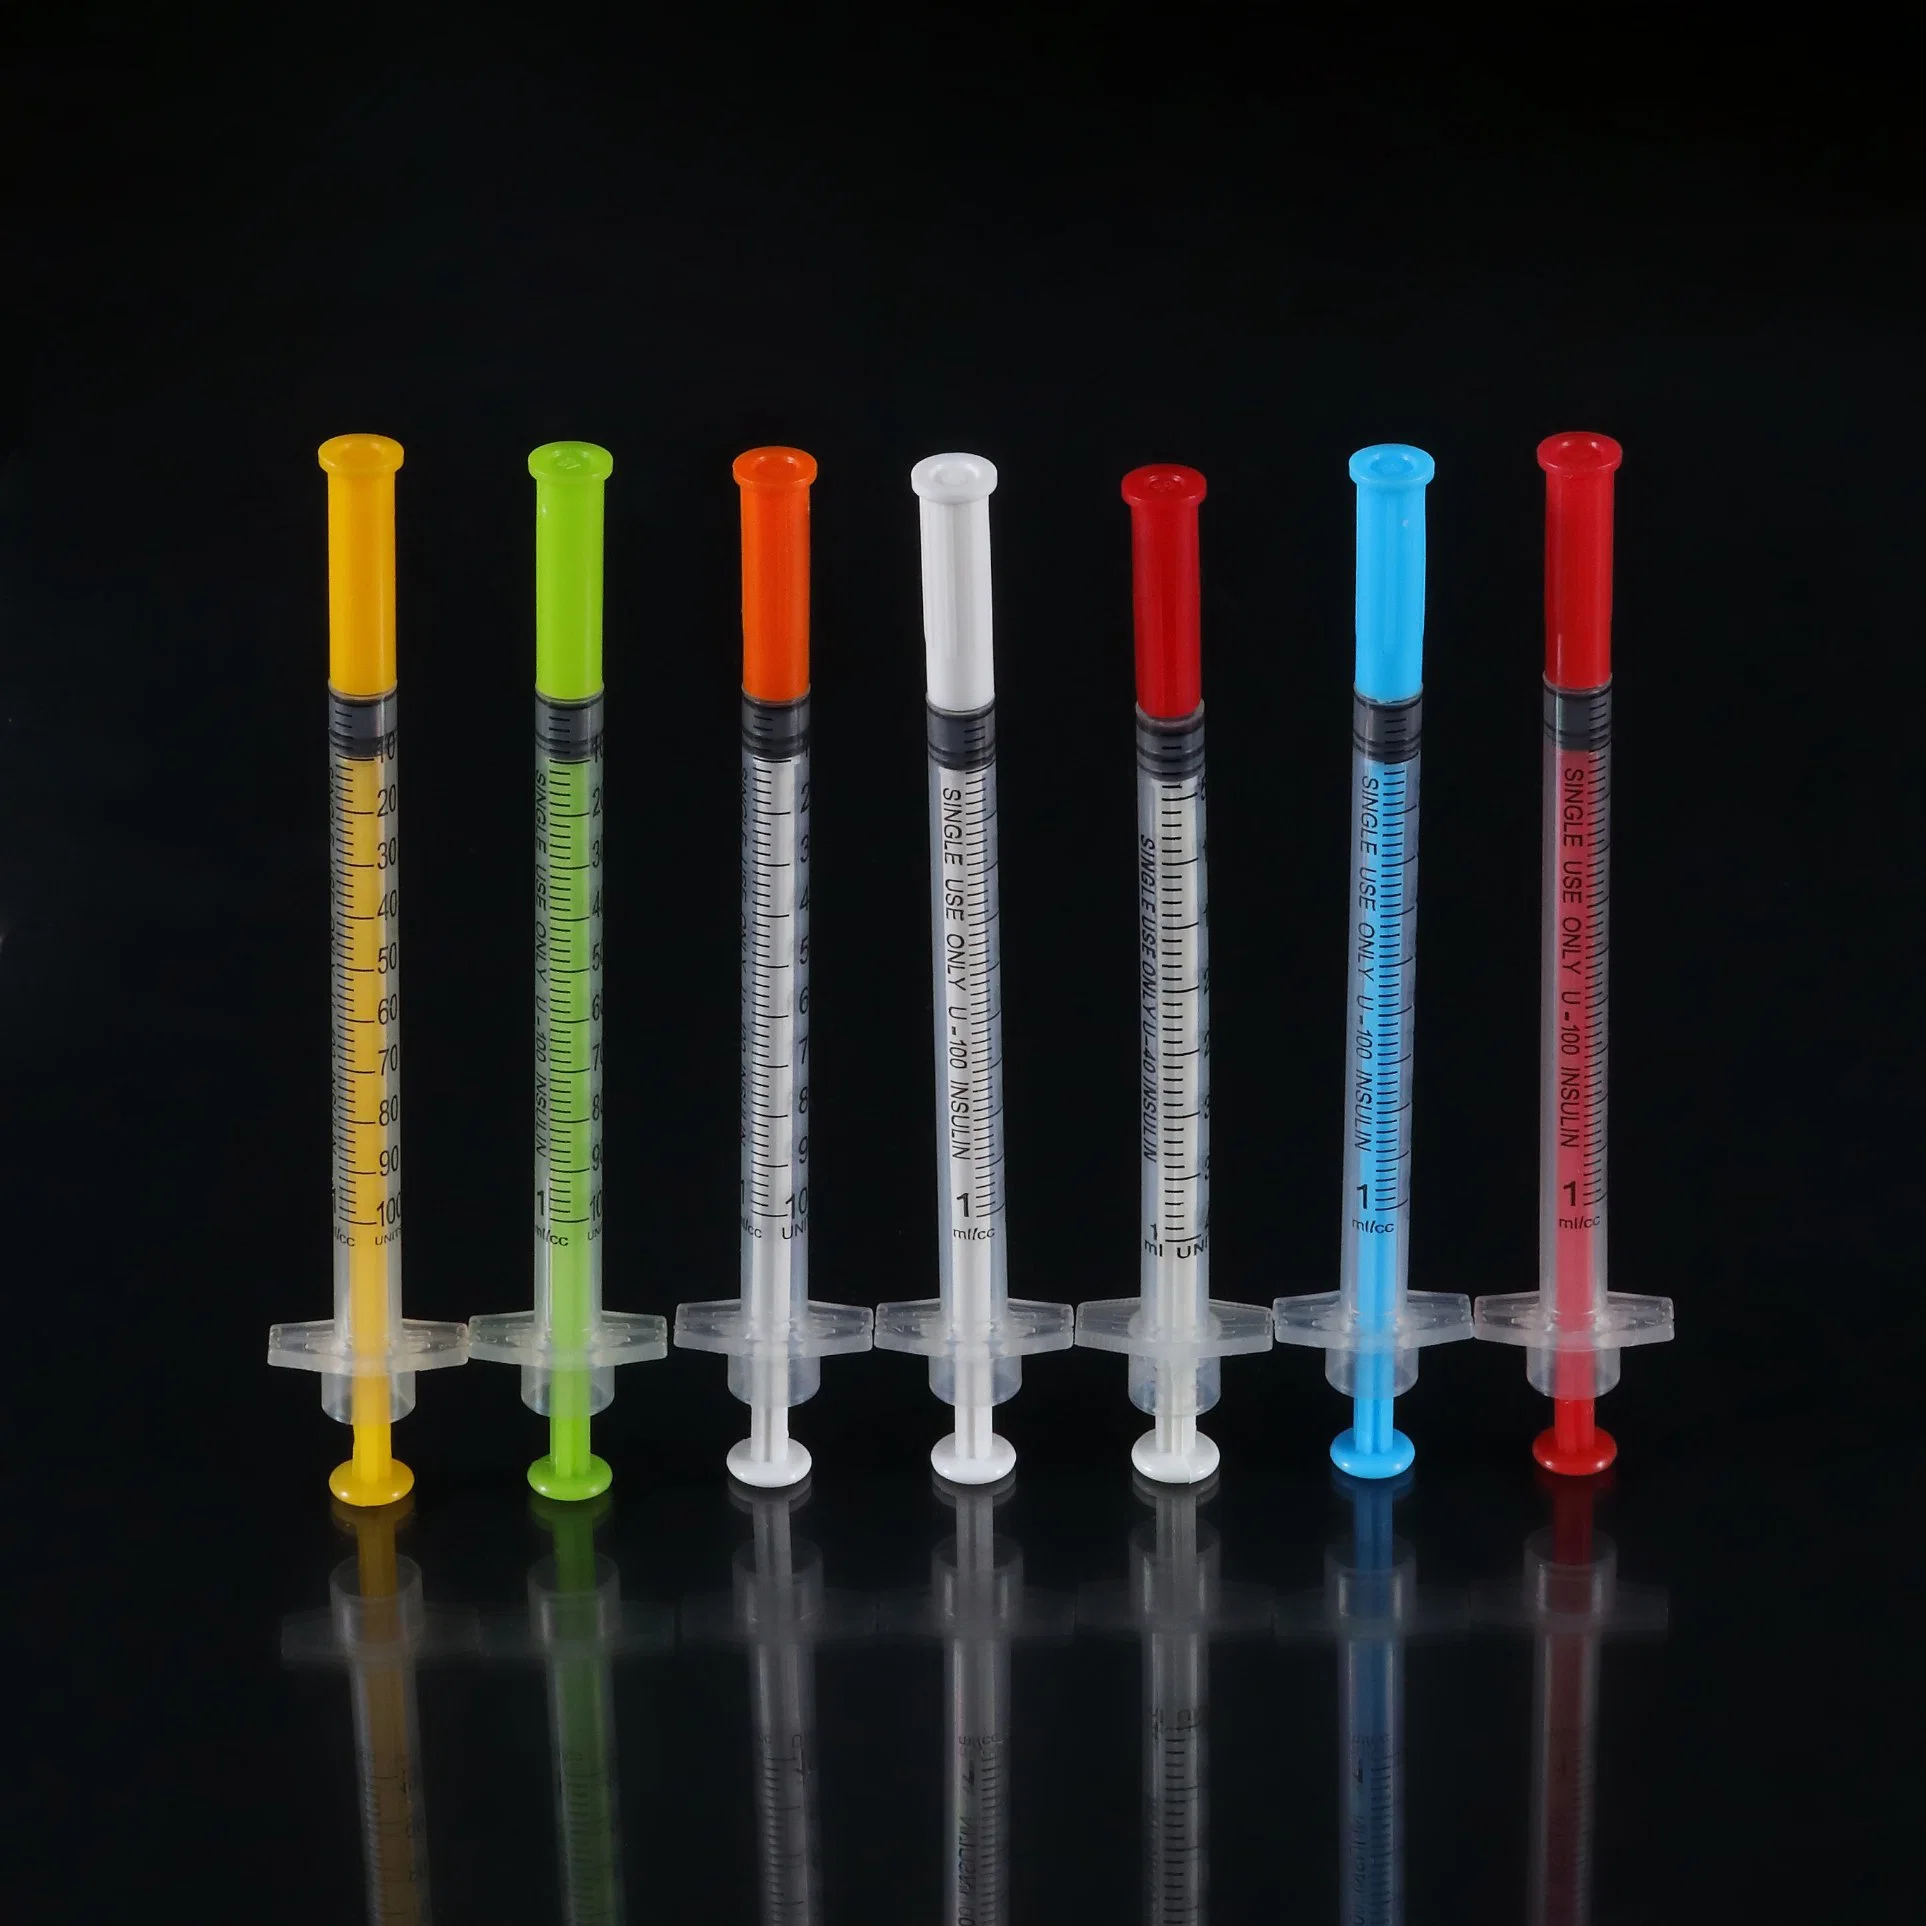 China Wholesale 0.5ml, 1ml Disposable Medical Products Insulin Syringe with Fixed Needle or Detached Needle